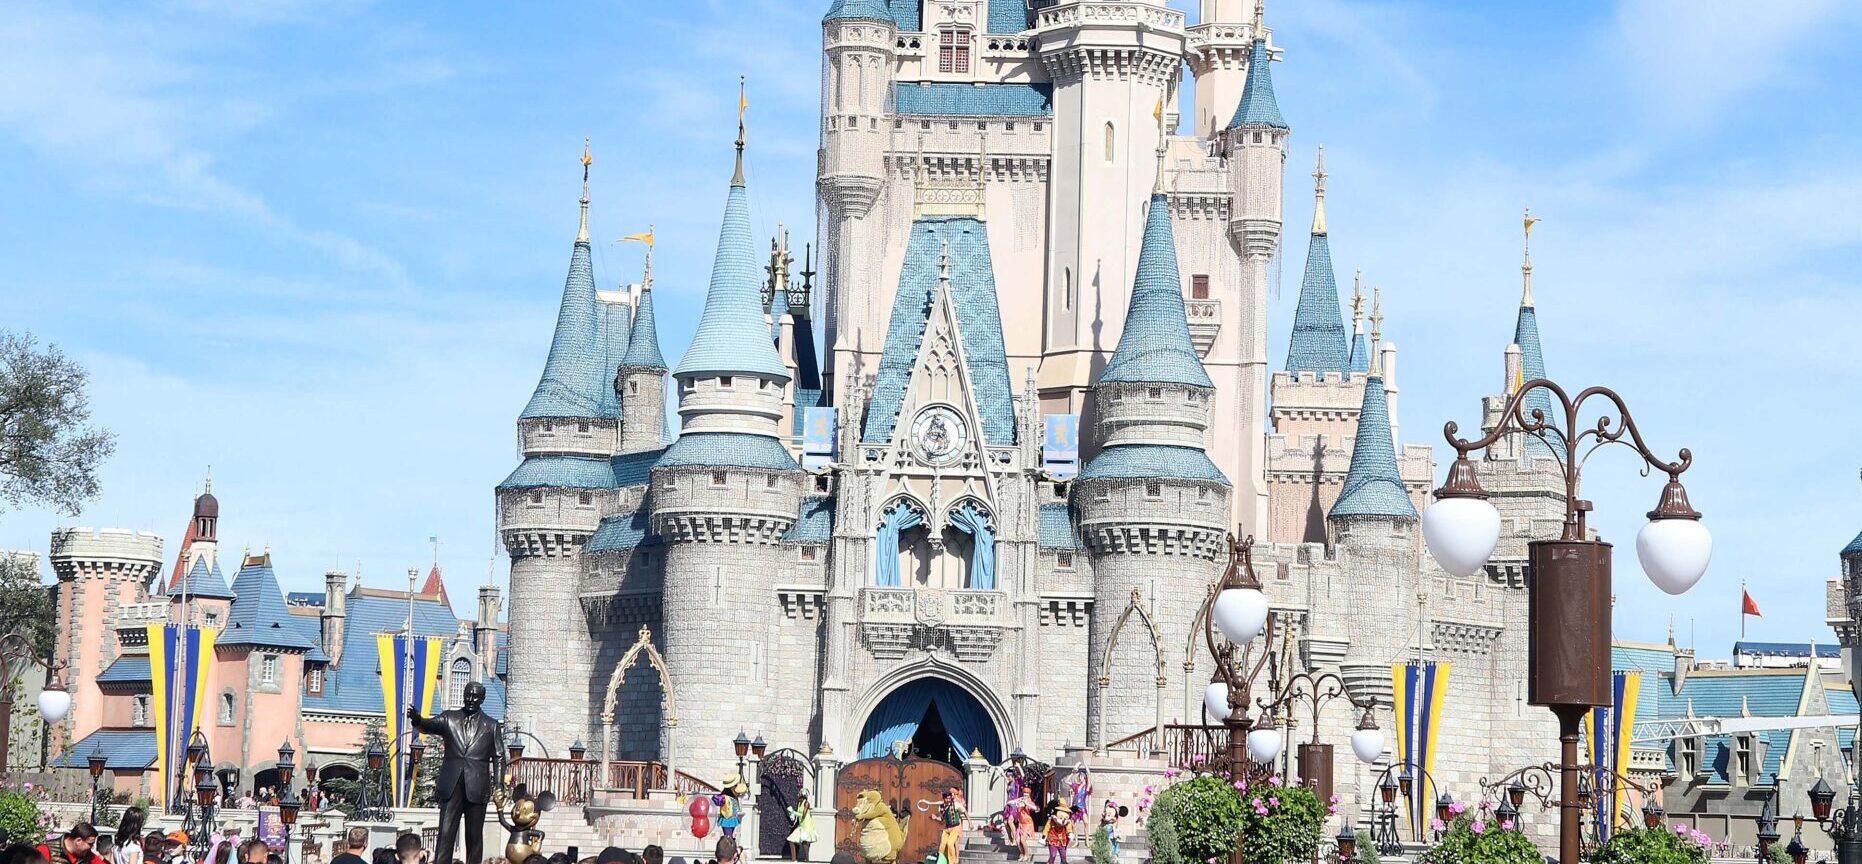 Disney Fires Employee After Video Shows Racial Altercation With Guest